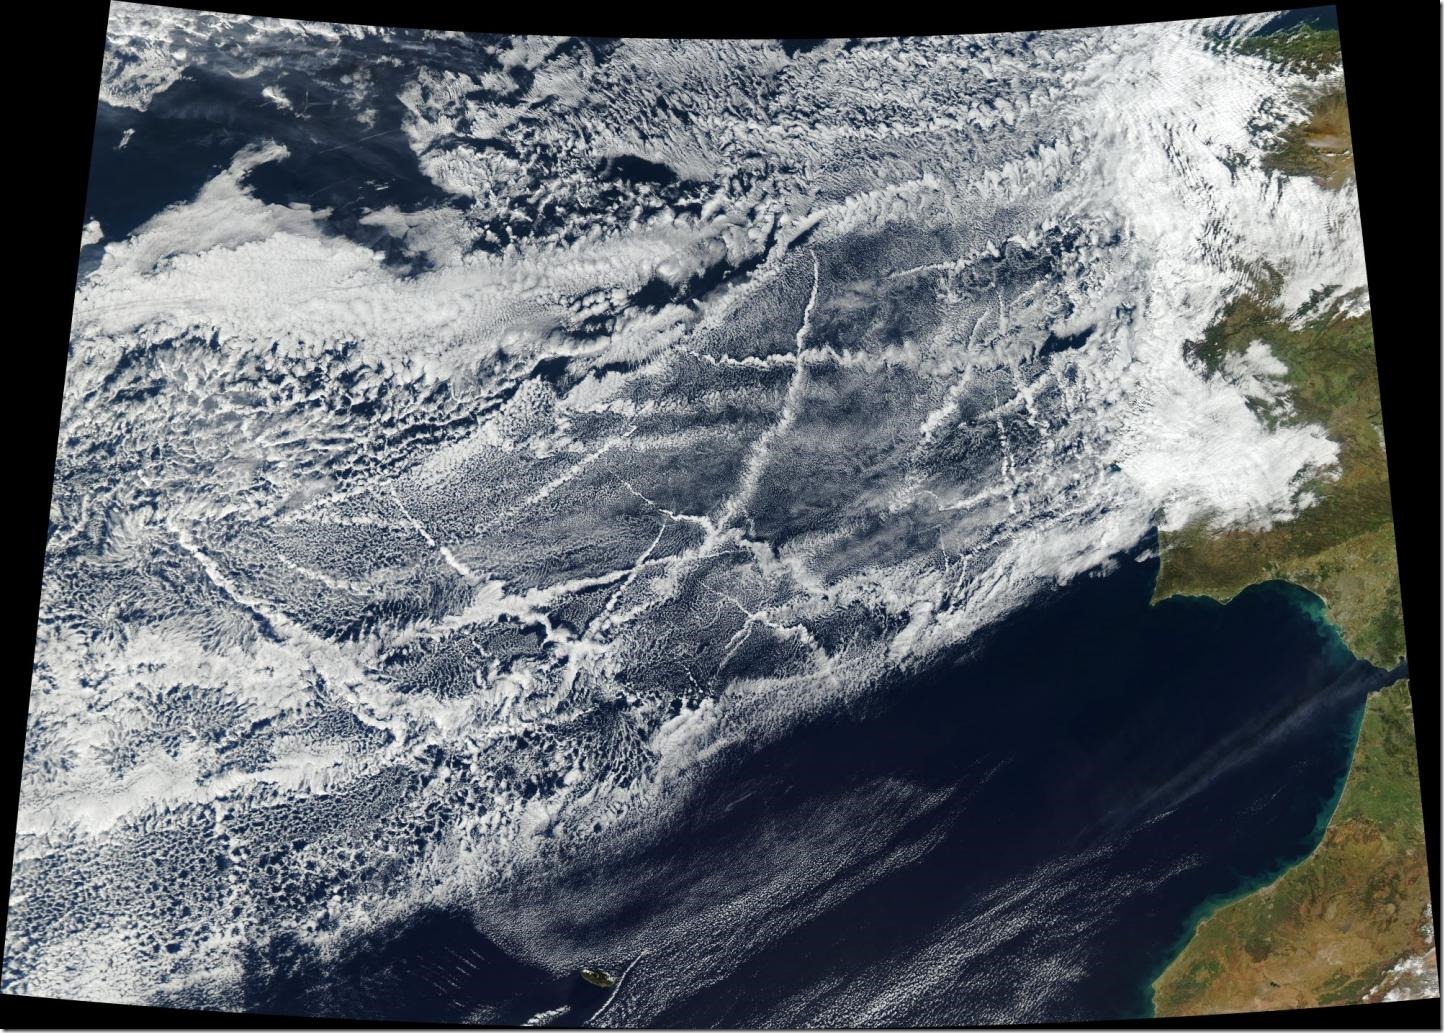 This satellite image was taken January 16, 2018, off the coast of Europe. Pollution from ships creates lines of clouds that can stretch hundreds of miles. The narrower ends of the clouds are youngest, while the broader, wavier ends are older. Credit NASA Earth Observatory